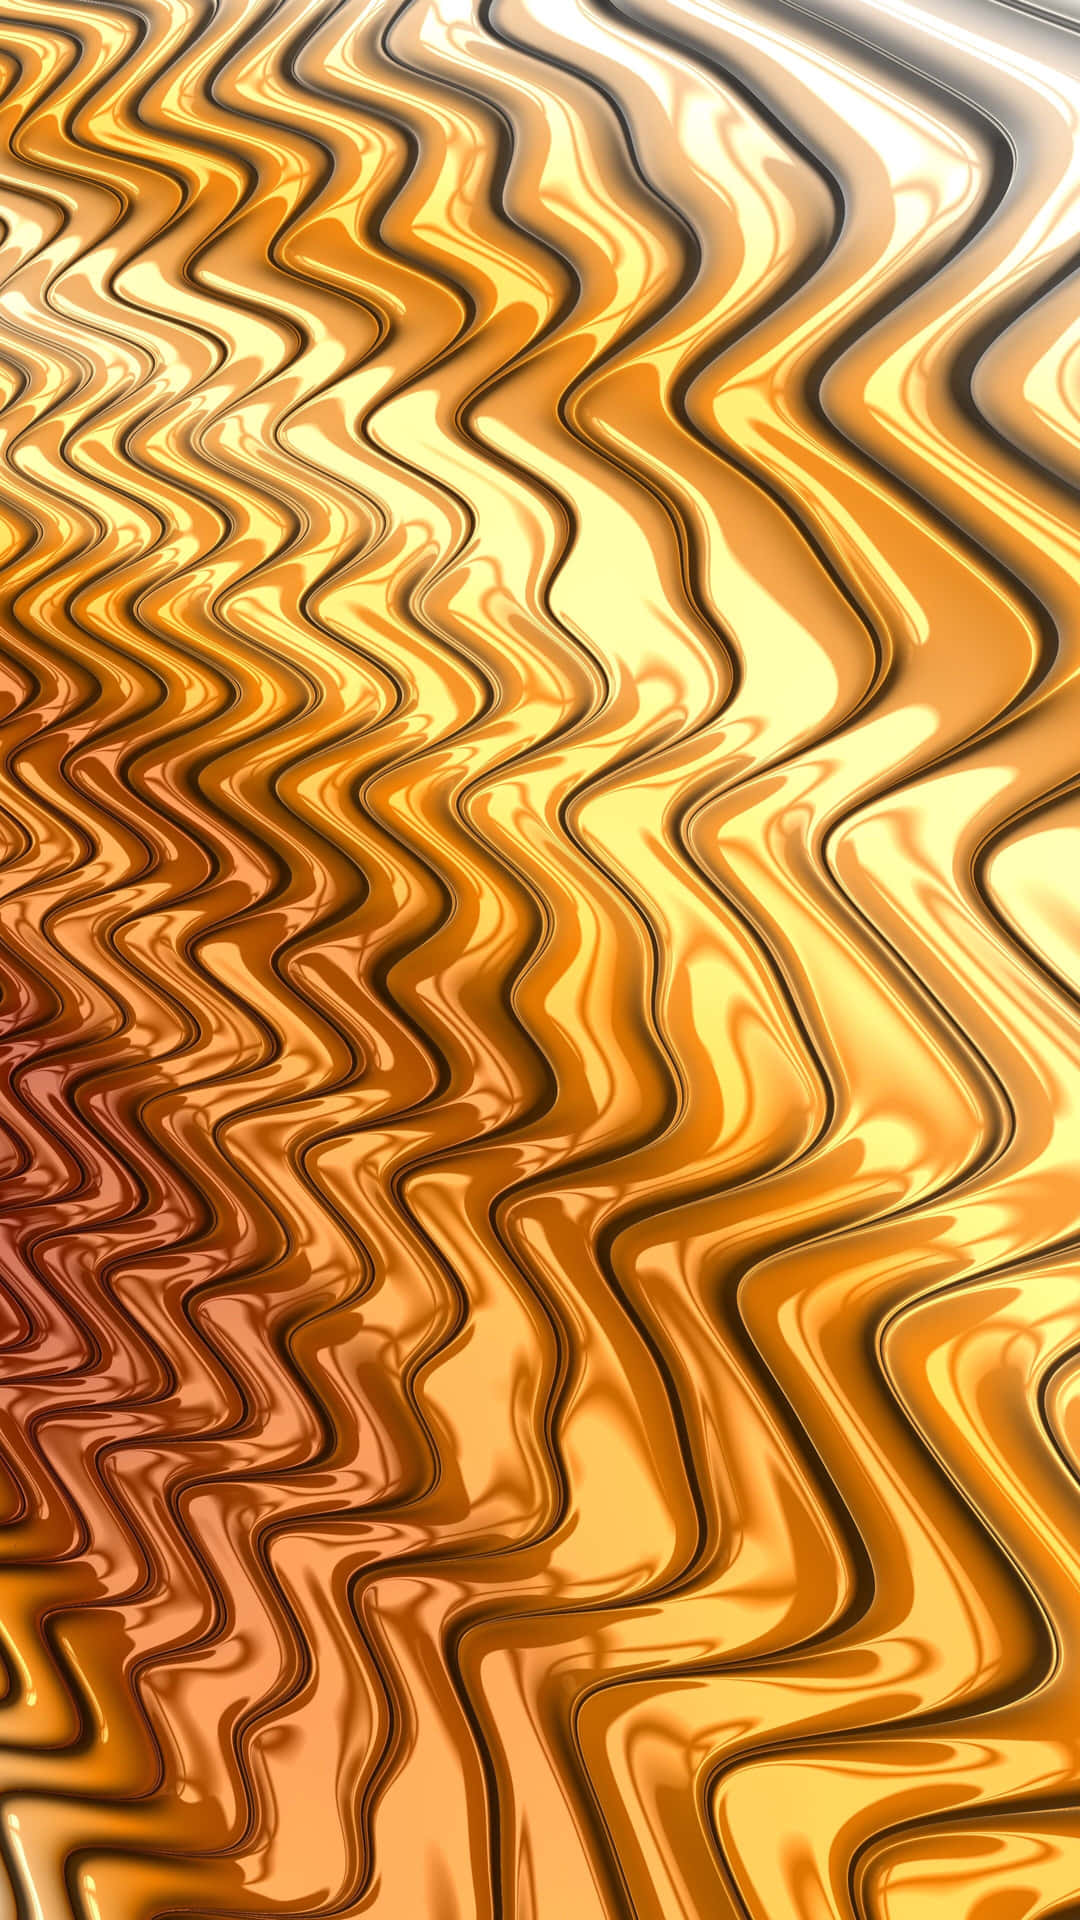 A Vibrant Orange and Pink Wavy Background